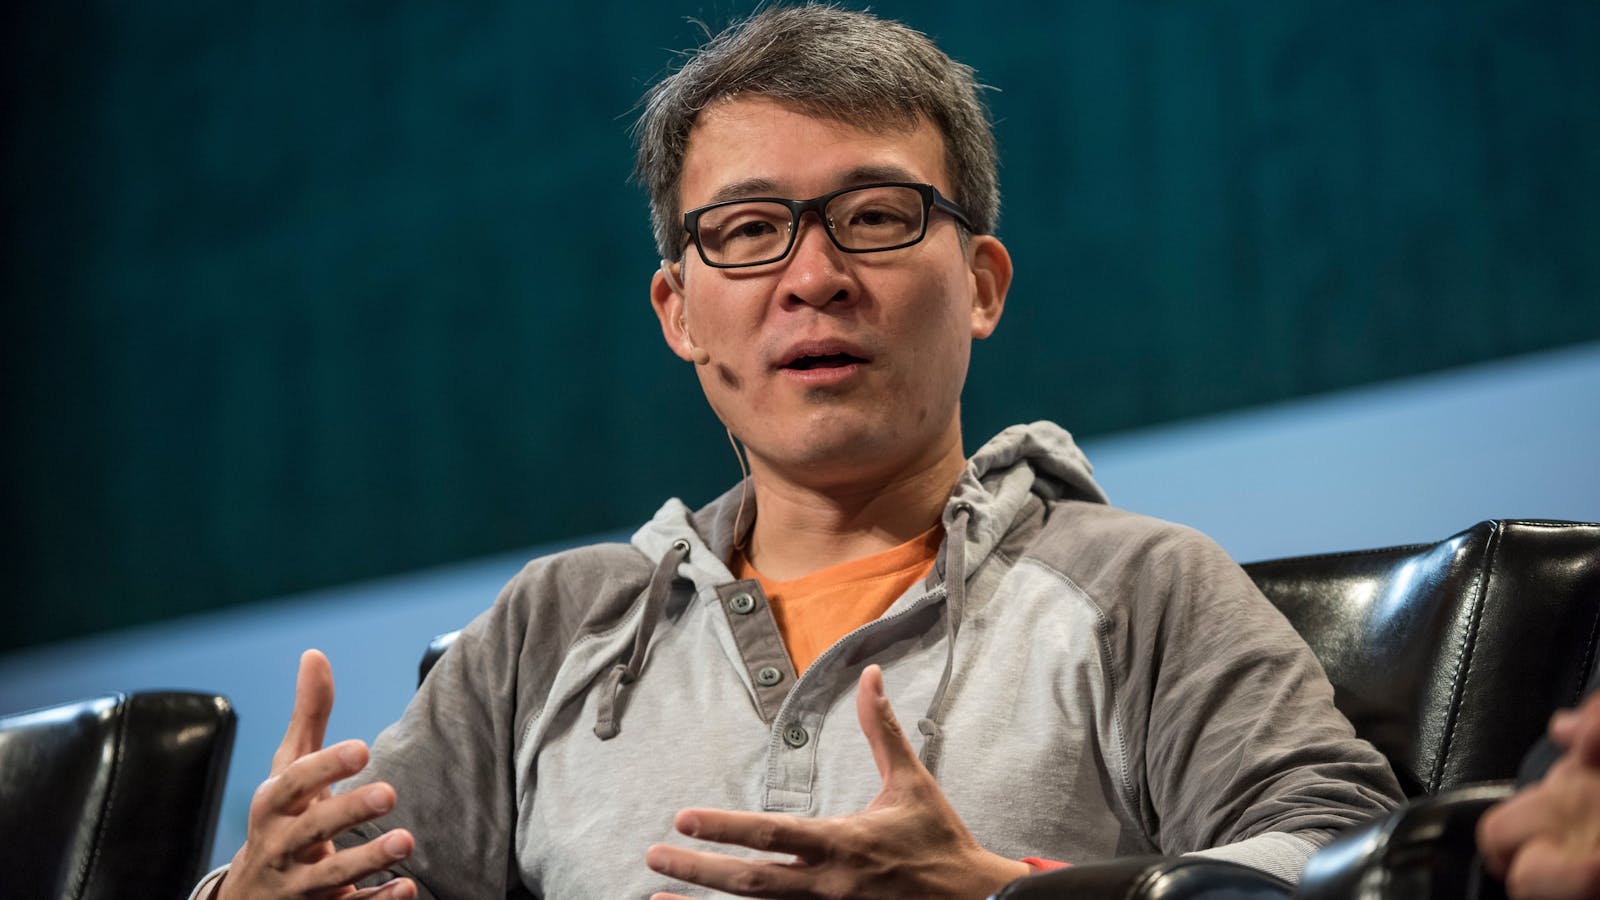 Fitbit CEO James Park. Photo by Bloomberg.